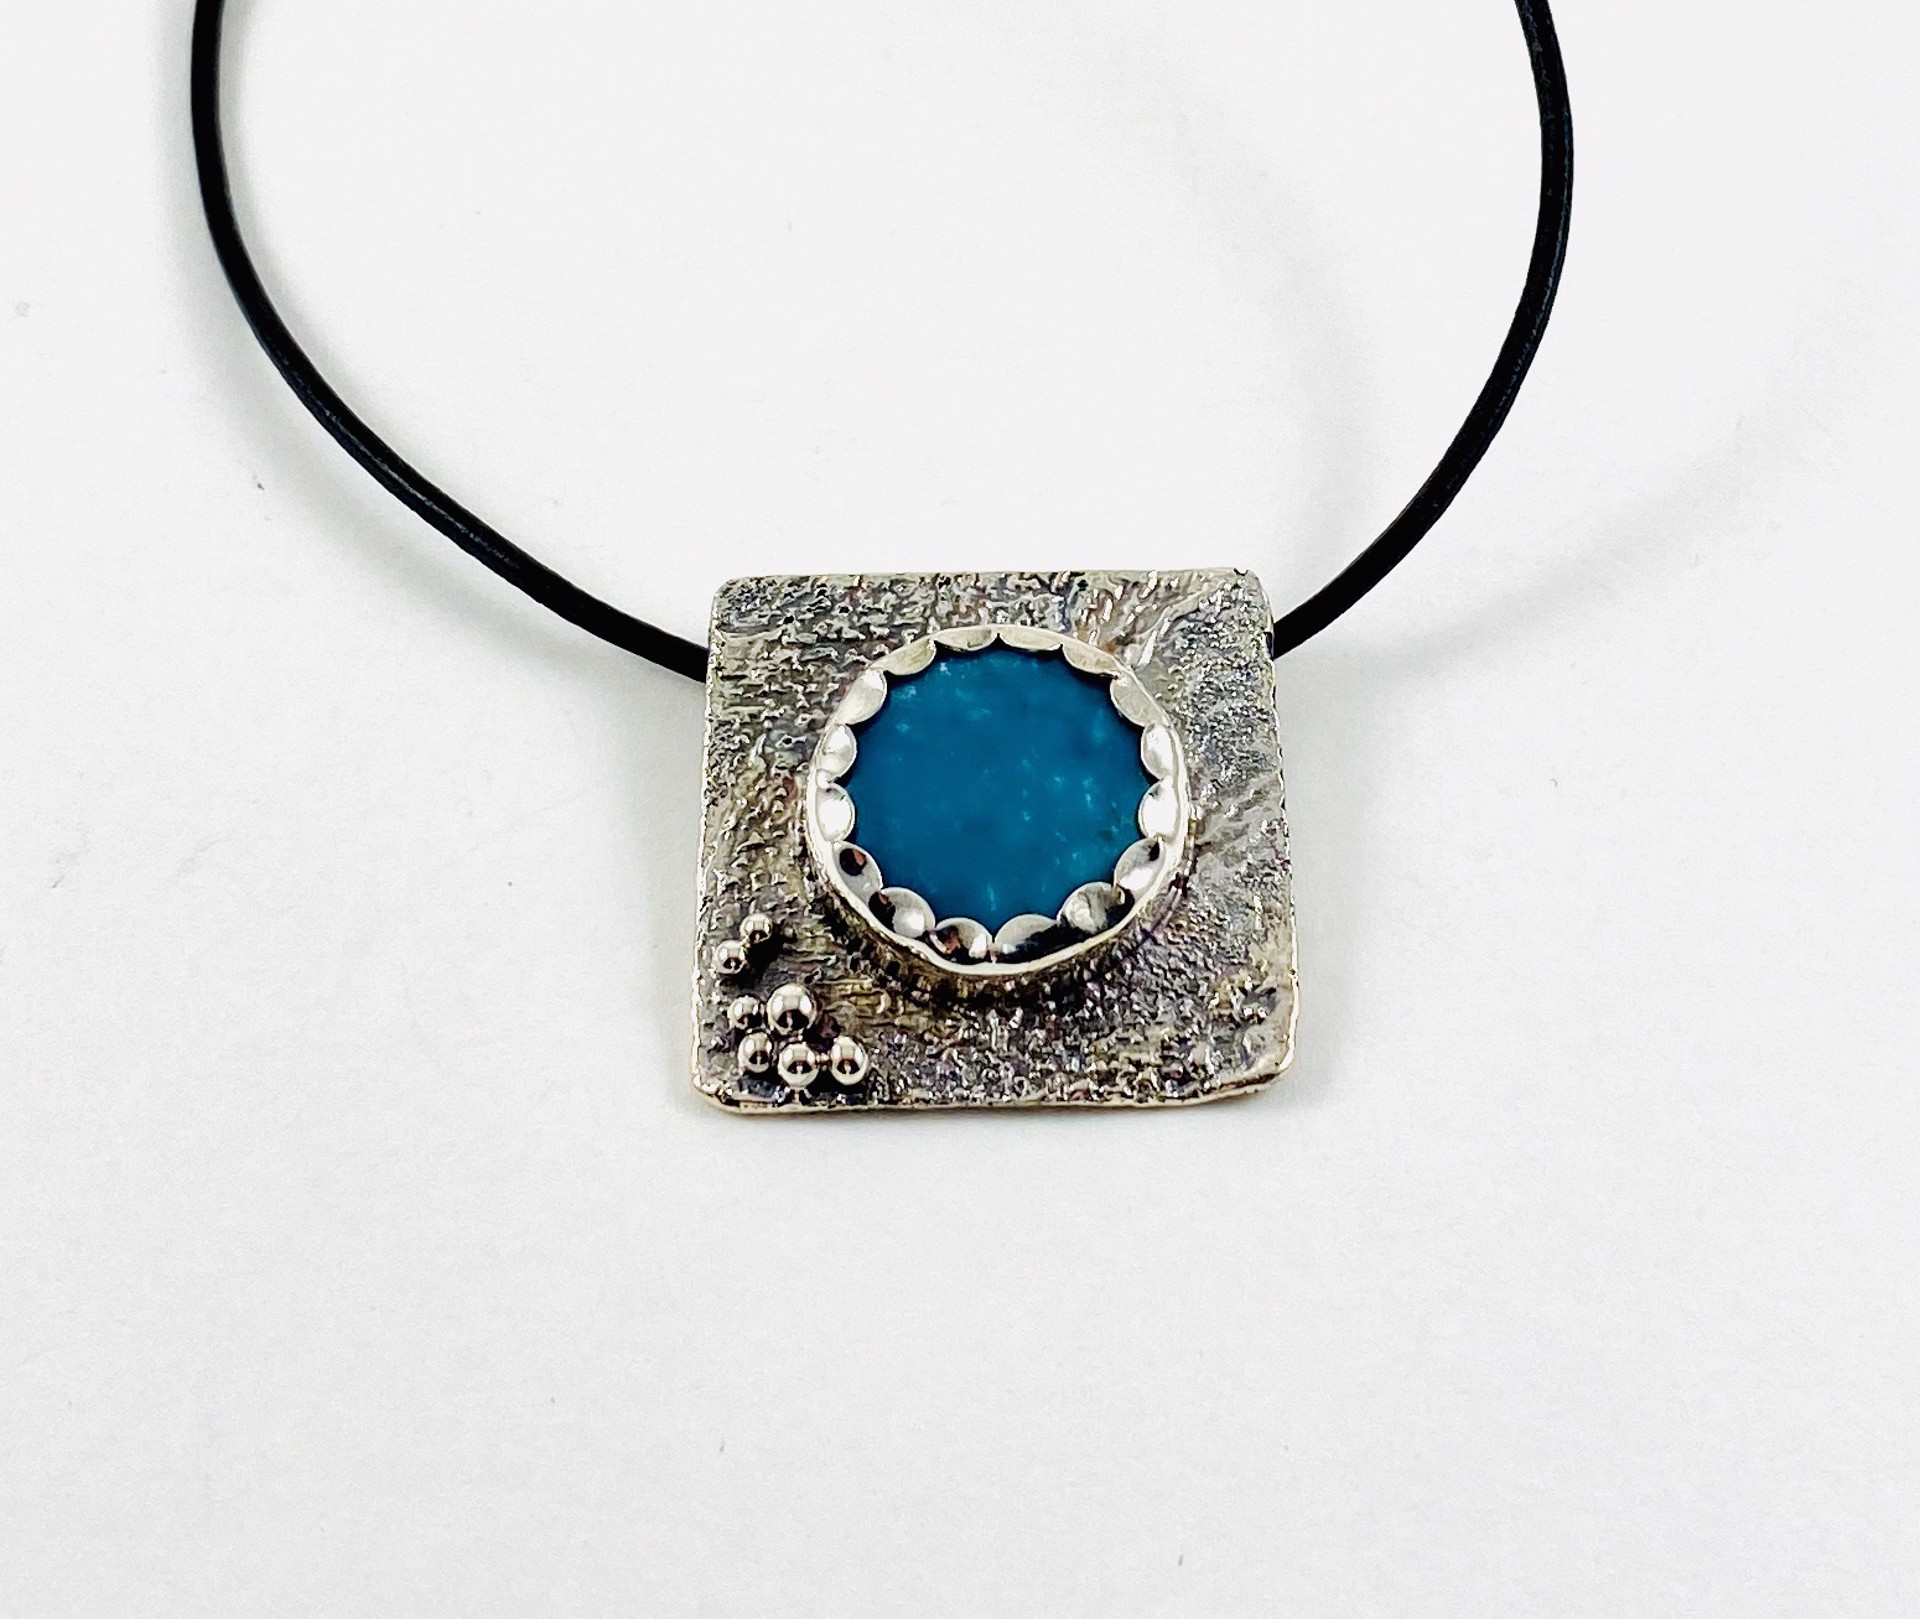 Kingsman Turquoise, Reticulated  Silver pendant, 16" leather by Anne Bivens